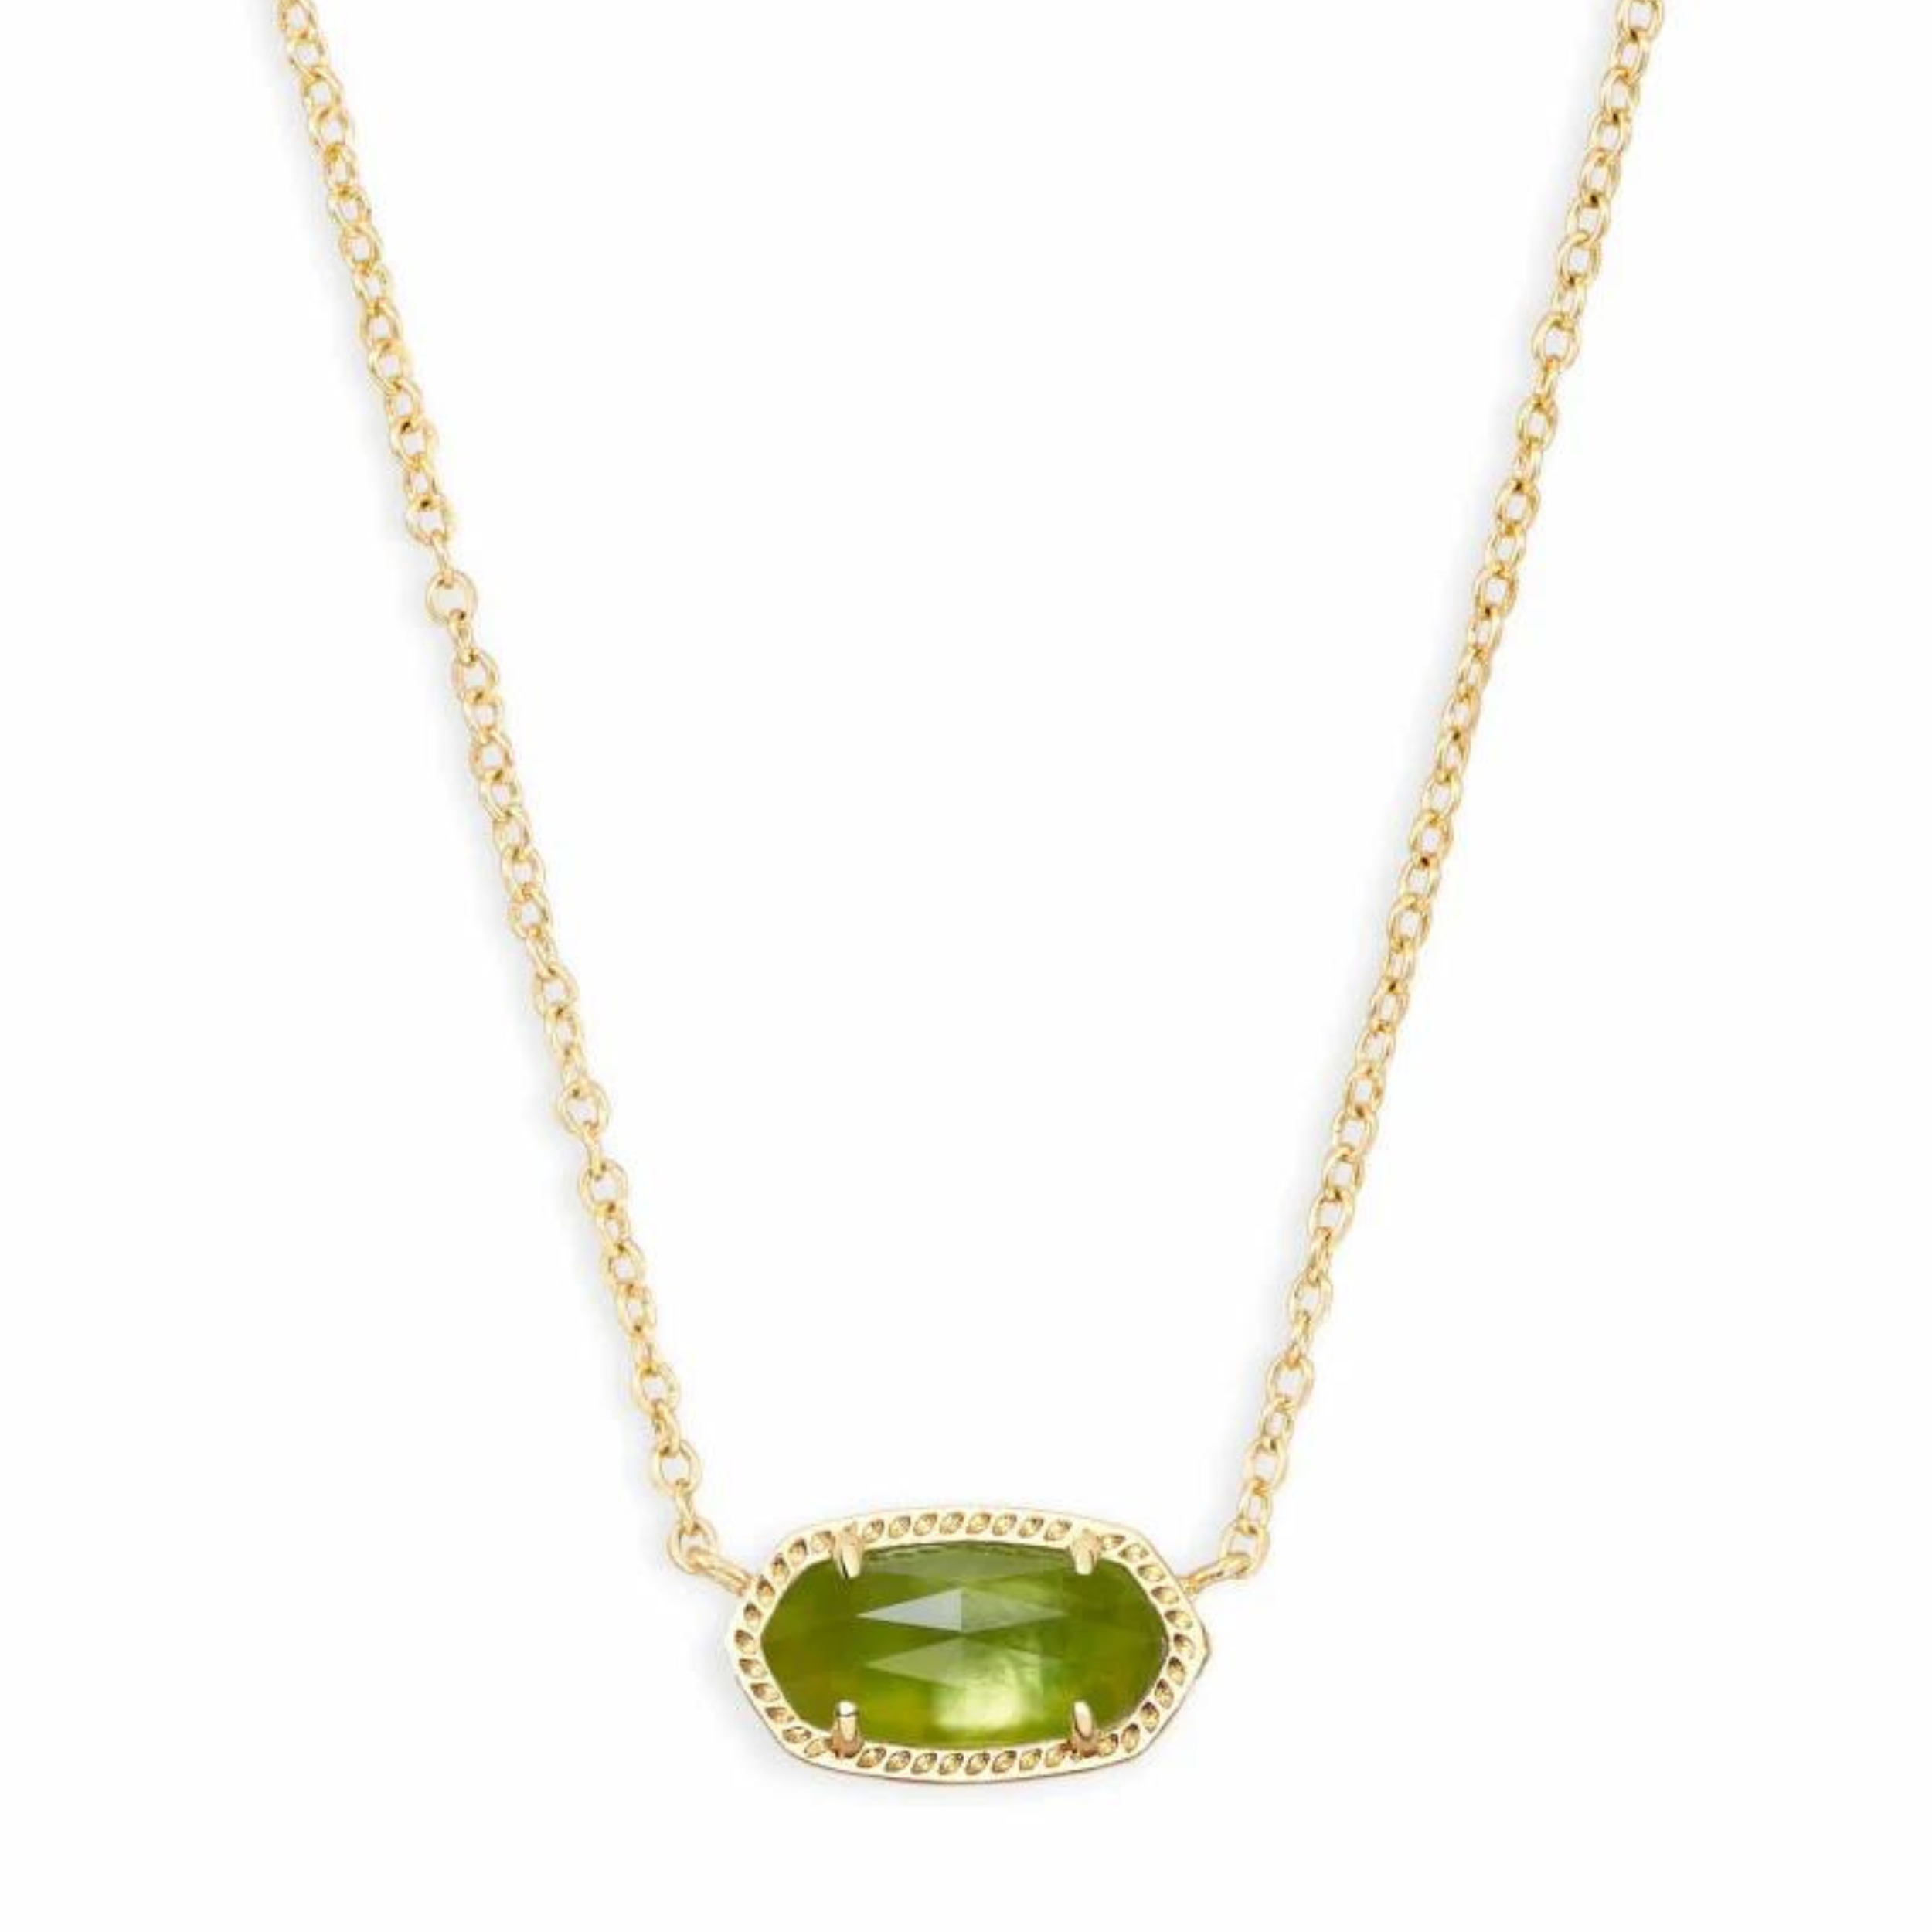 Gold necklace with peridot illusion stone, pictured on a white background.